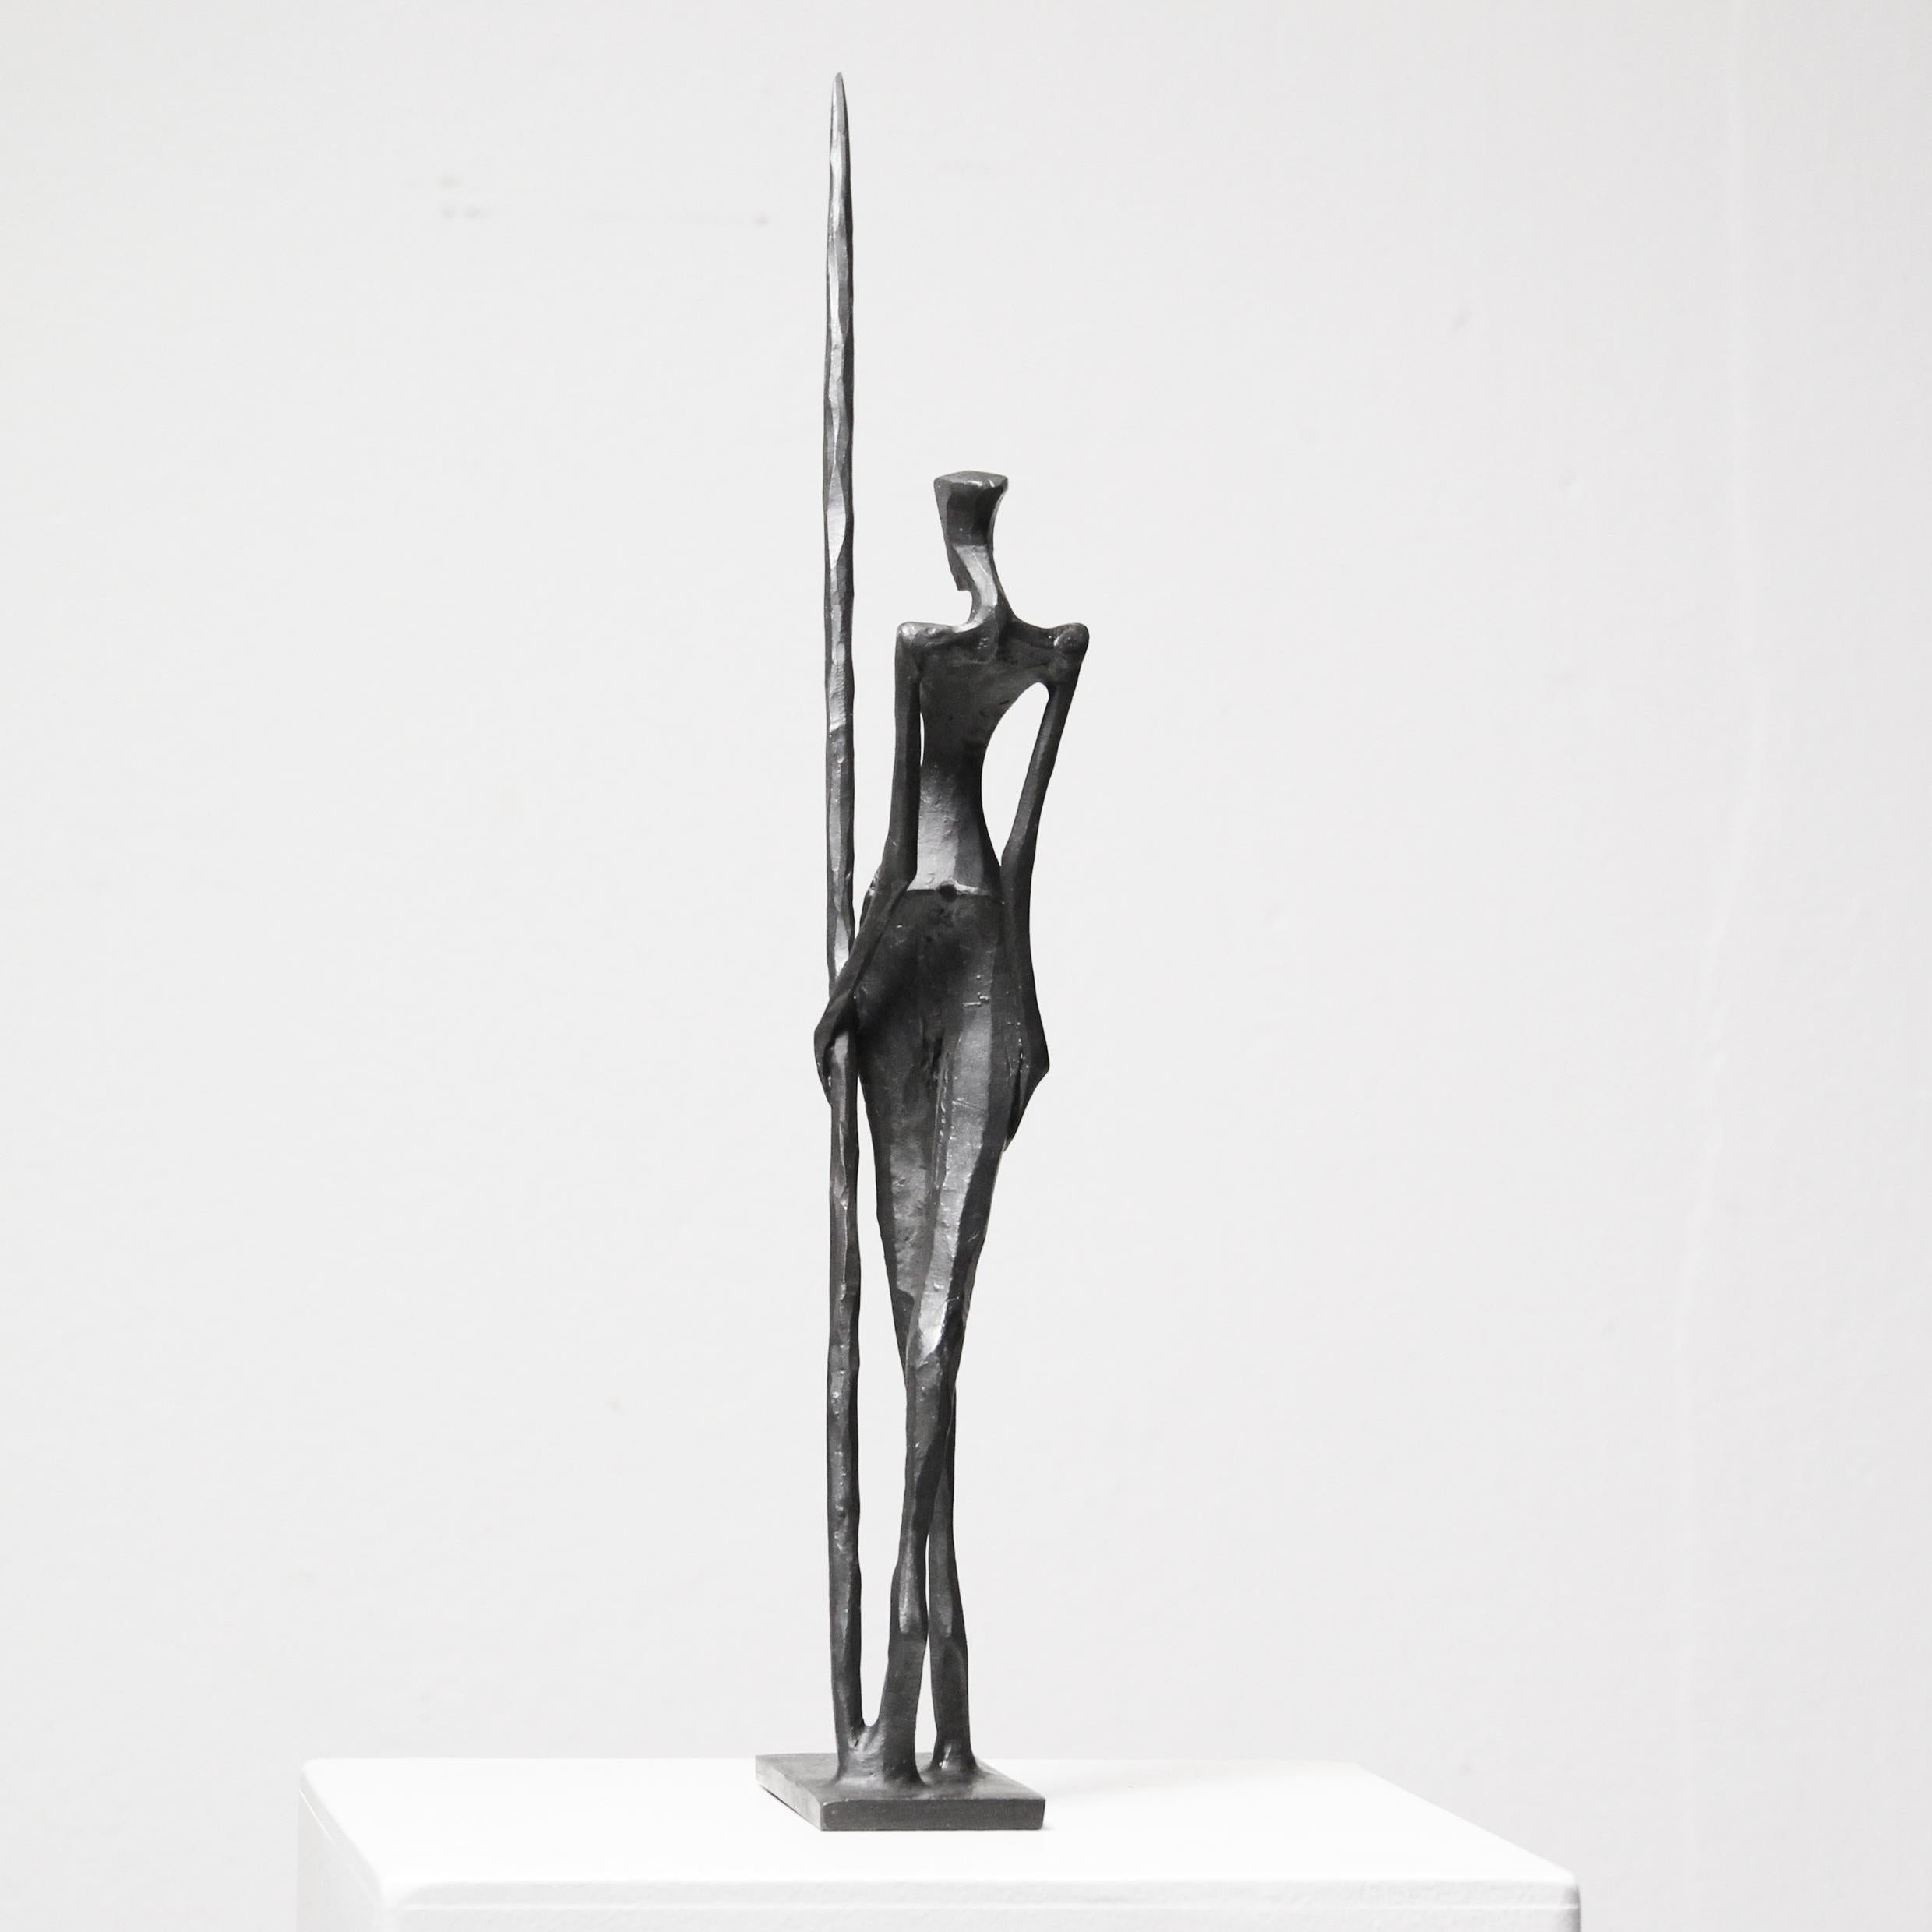 Artemis II is an elegant figurative bronze sculpture of the female form by Nando Kallweit.  A woman carrying a spear in the pose of a proud warrior.

Artemis II is produced in an edition of 25 pieces.  Nando hammers his mark into the base as well as